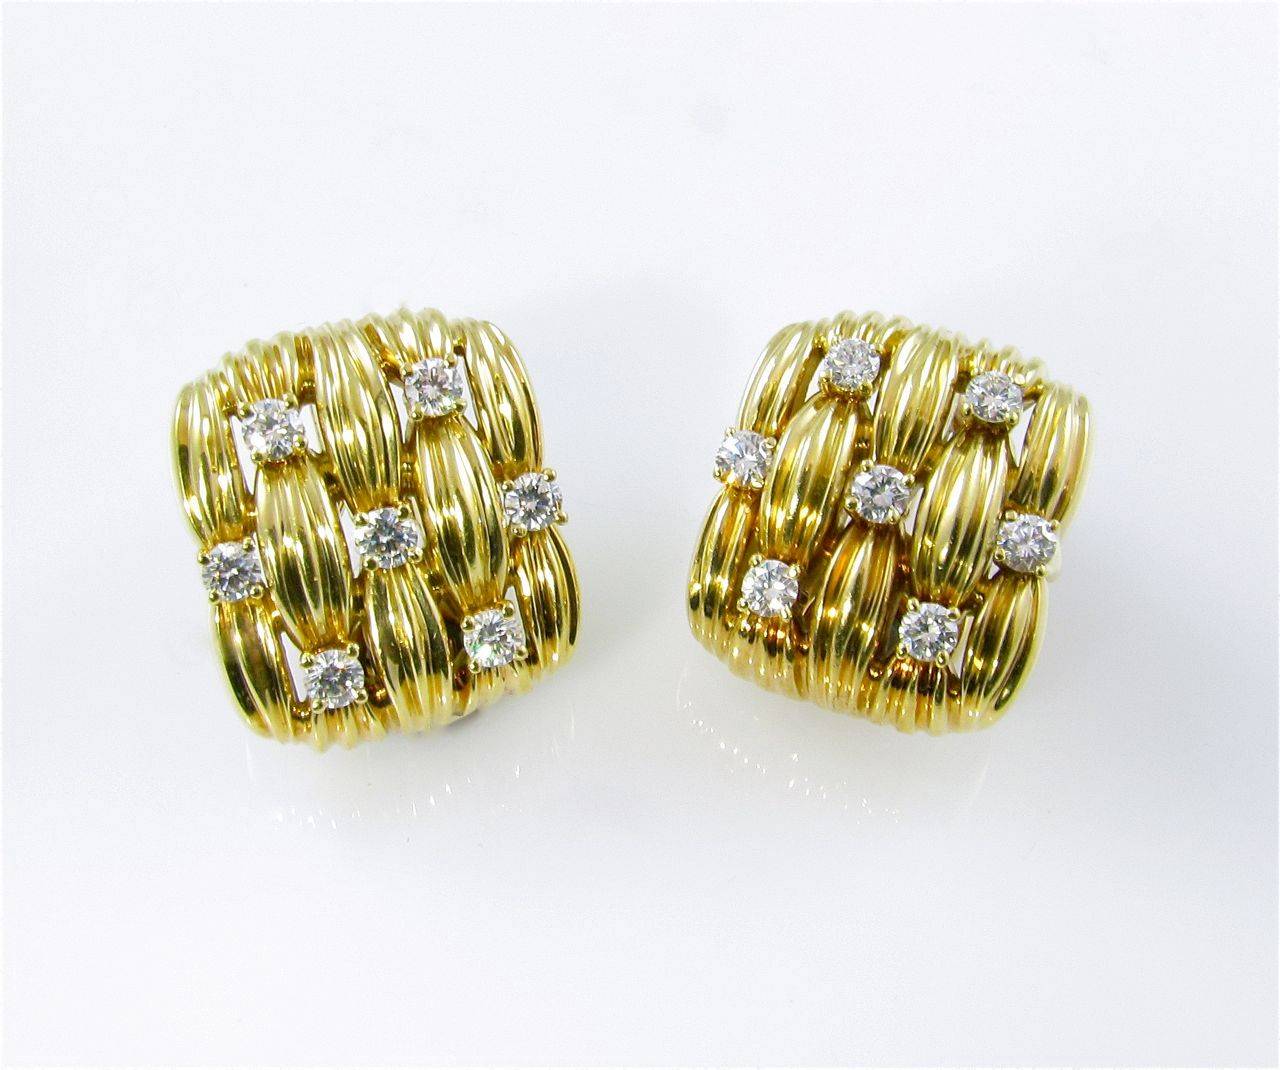 A pair of 18 karat yellow gold and diamond earrings, Tiffany & Co.  Signed ©1982 Tiffany & Co. 750.  The earrings are of square shape with fluted basketweave design, each earring set with 7 round brilliant cut diamonds.  The 14 diamonds weigh a